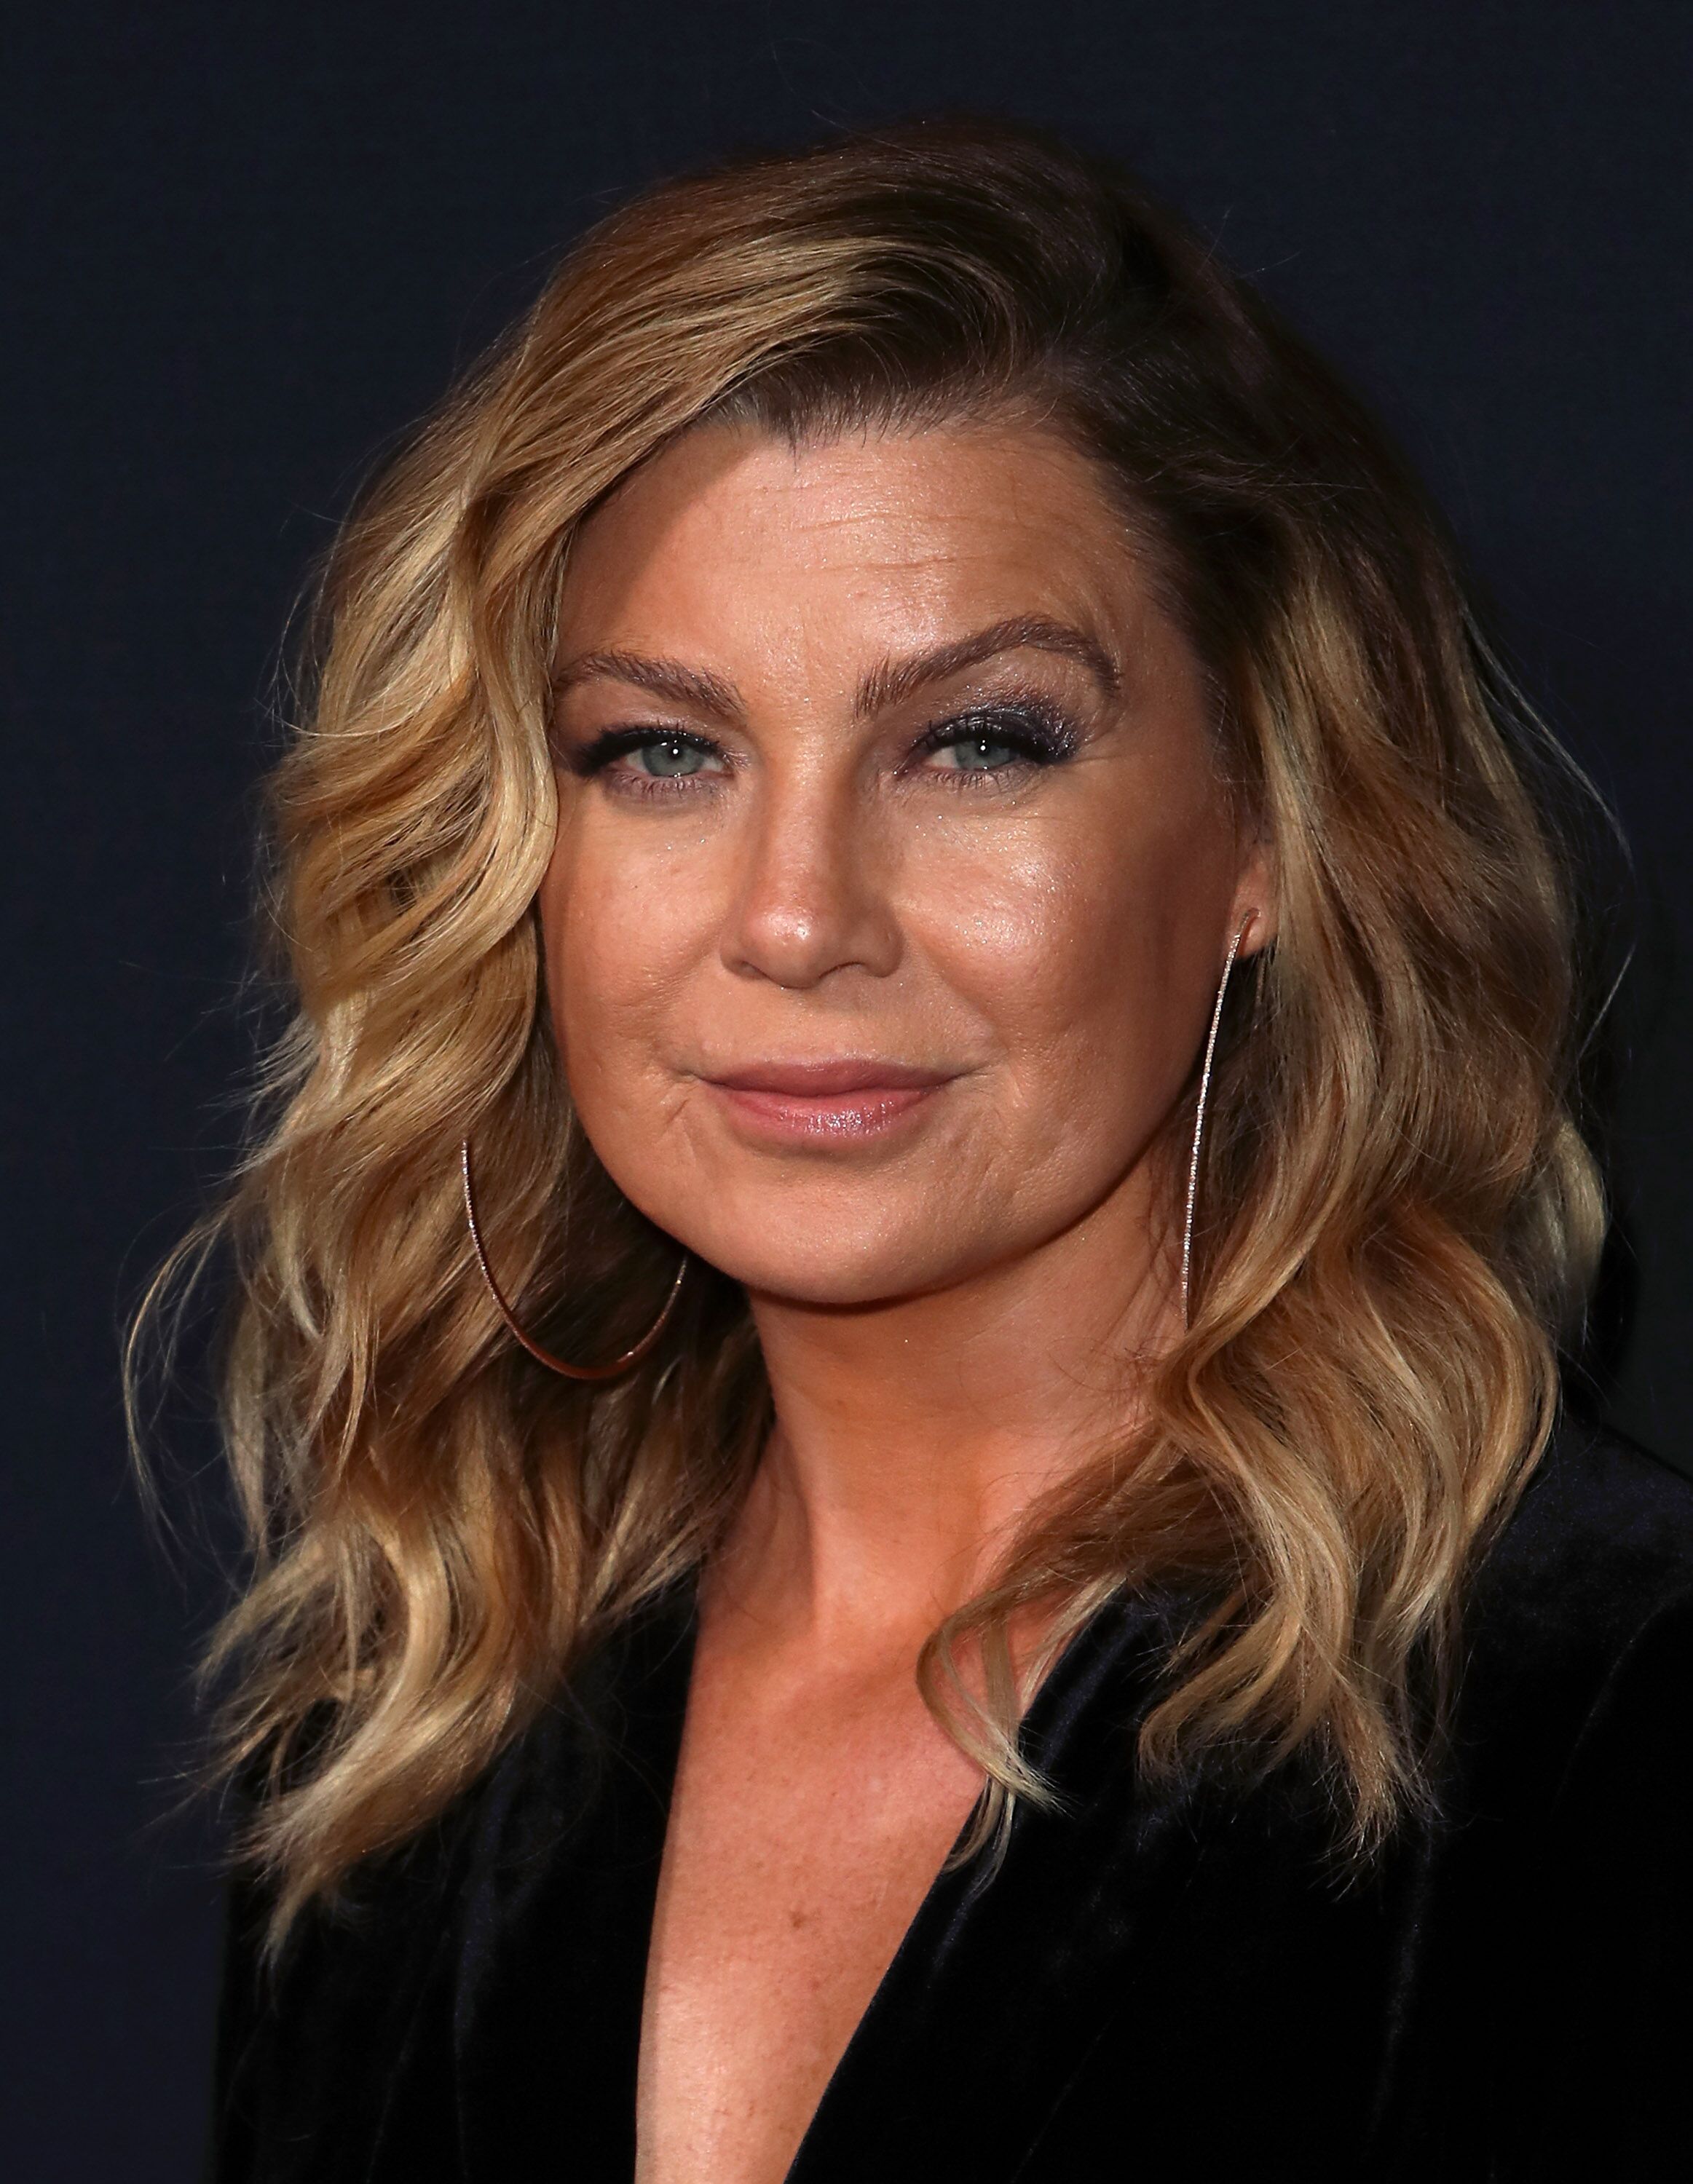 Ellen Pompeo attends the 300th episode celebration for ABC's "Grey's Anatomy" at TAO Hollywood on November 4, 2017. | Source: Getty Images